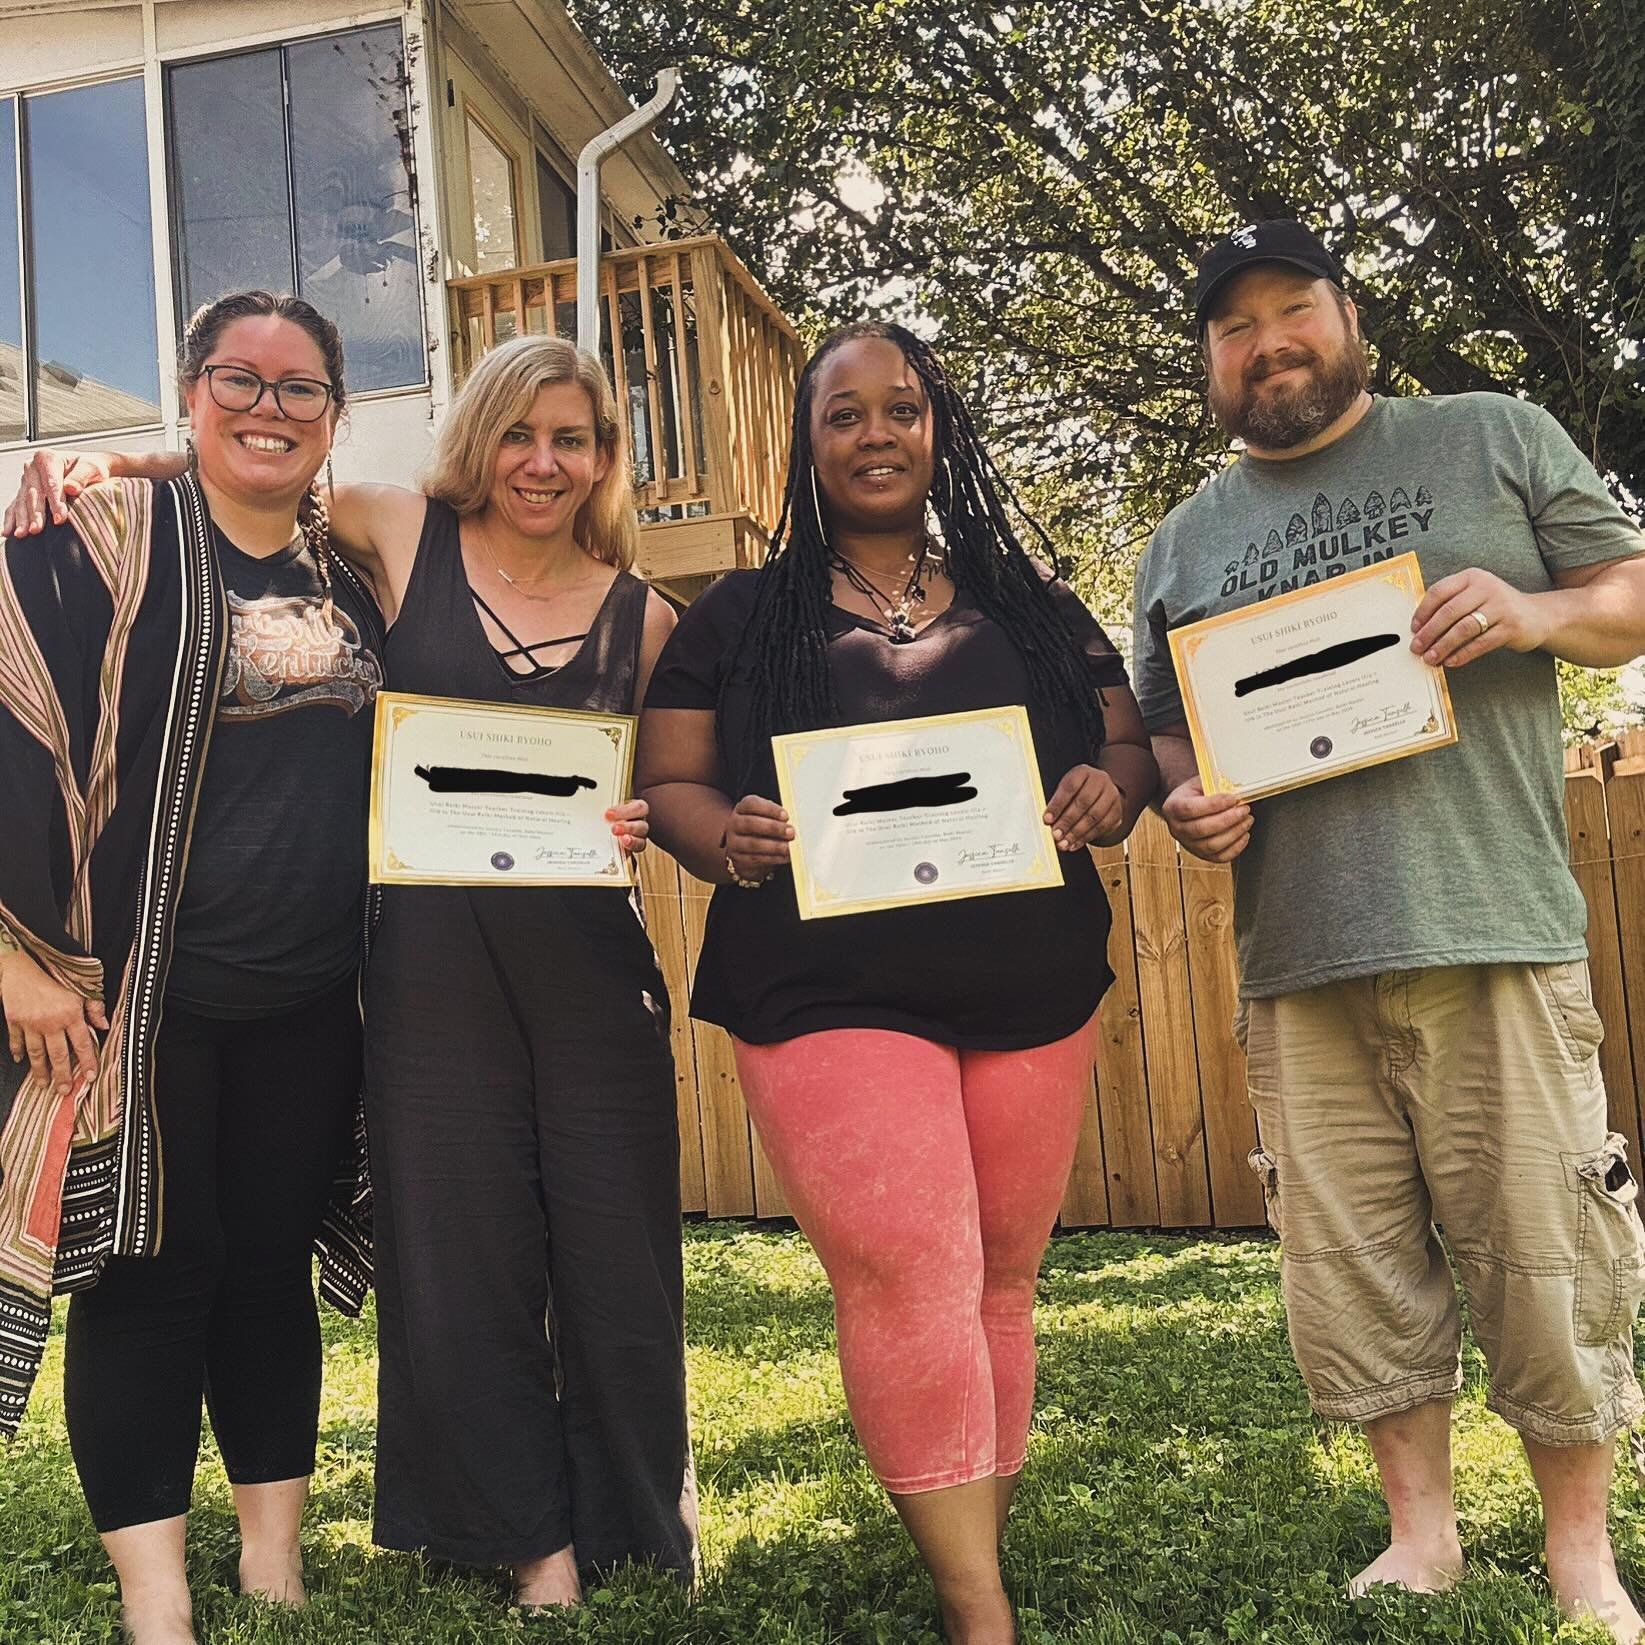 I want to congratulate these Reiki Master Healers on their certification over the weekend! What an honor to offer this class and be in the energy of these Reiki Practitioners. Thank you for your presence and dedication to your personal healing and he